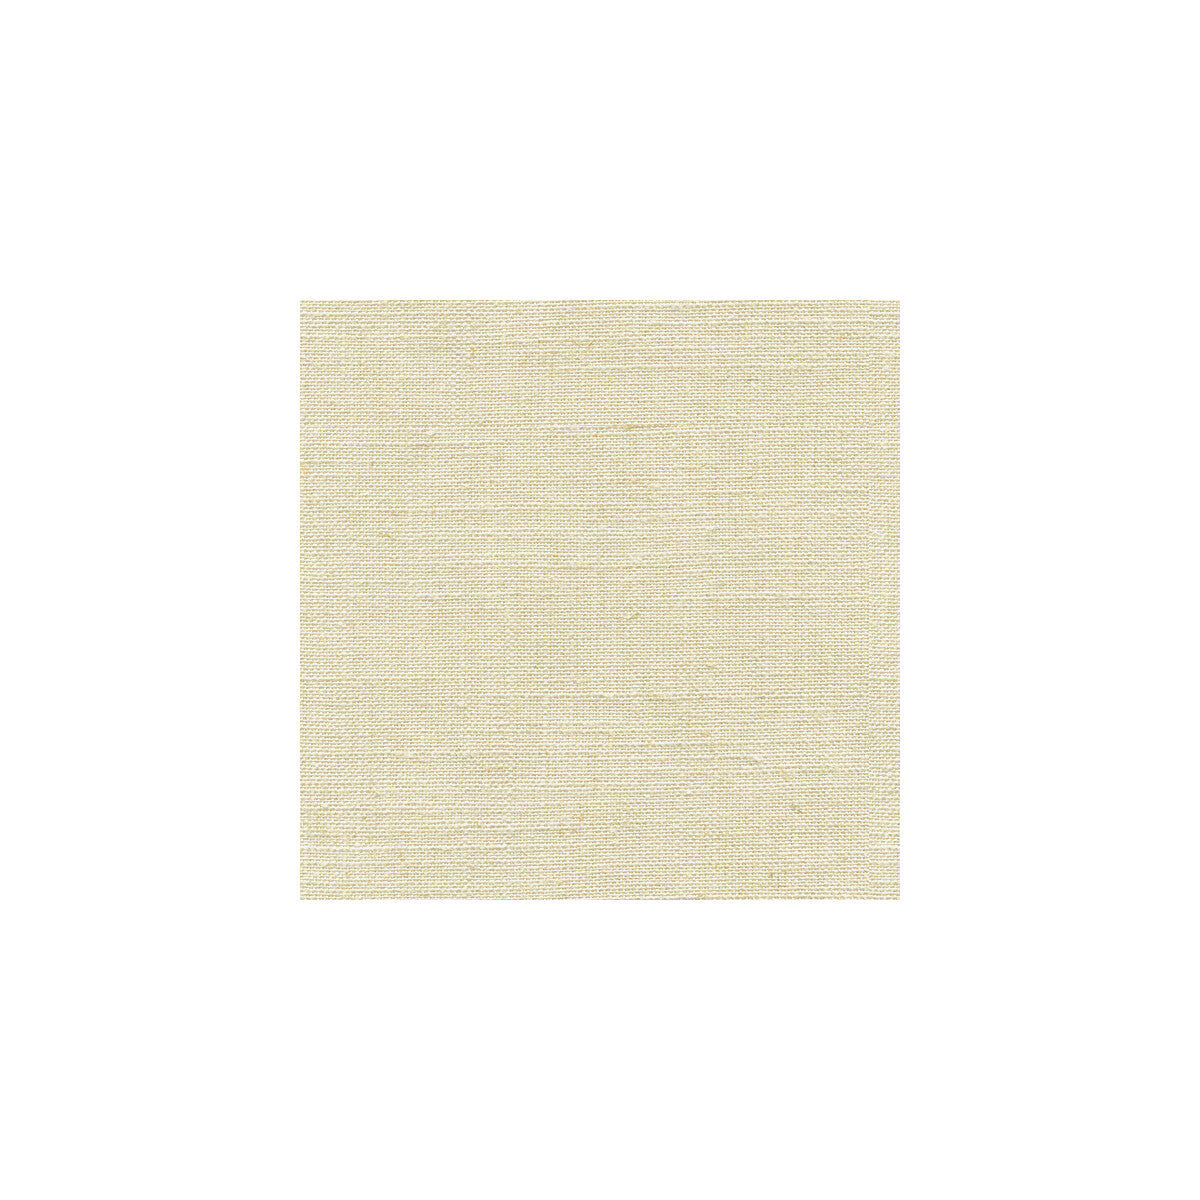 Mesmerizing fabric in ivory color - pattern 31502.1.0 - by Kravet Smart in the Gis collection